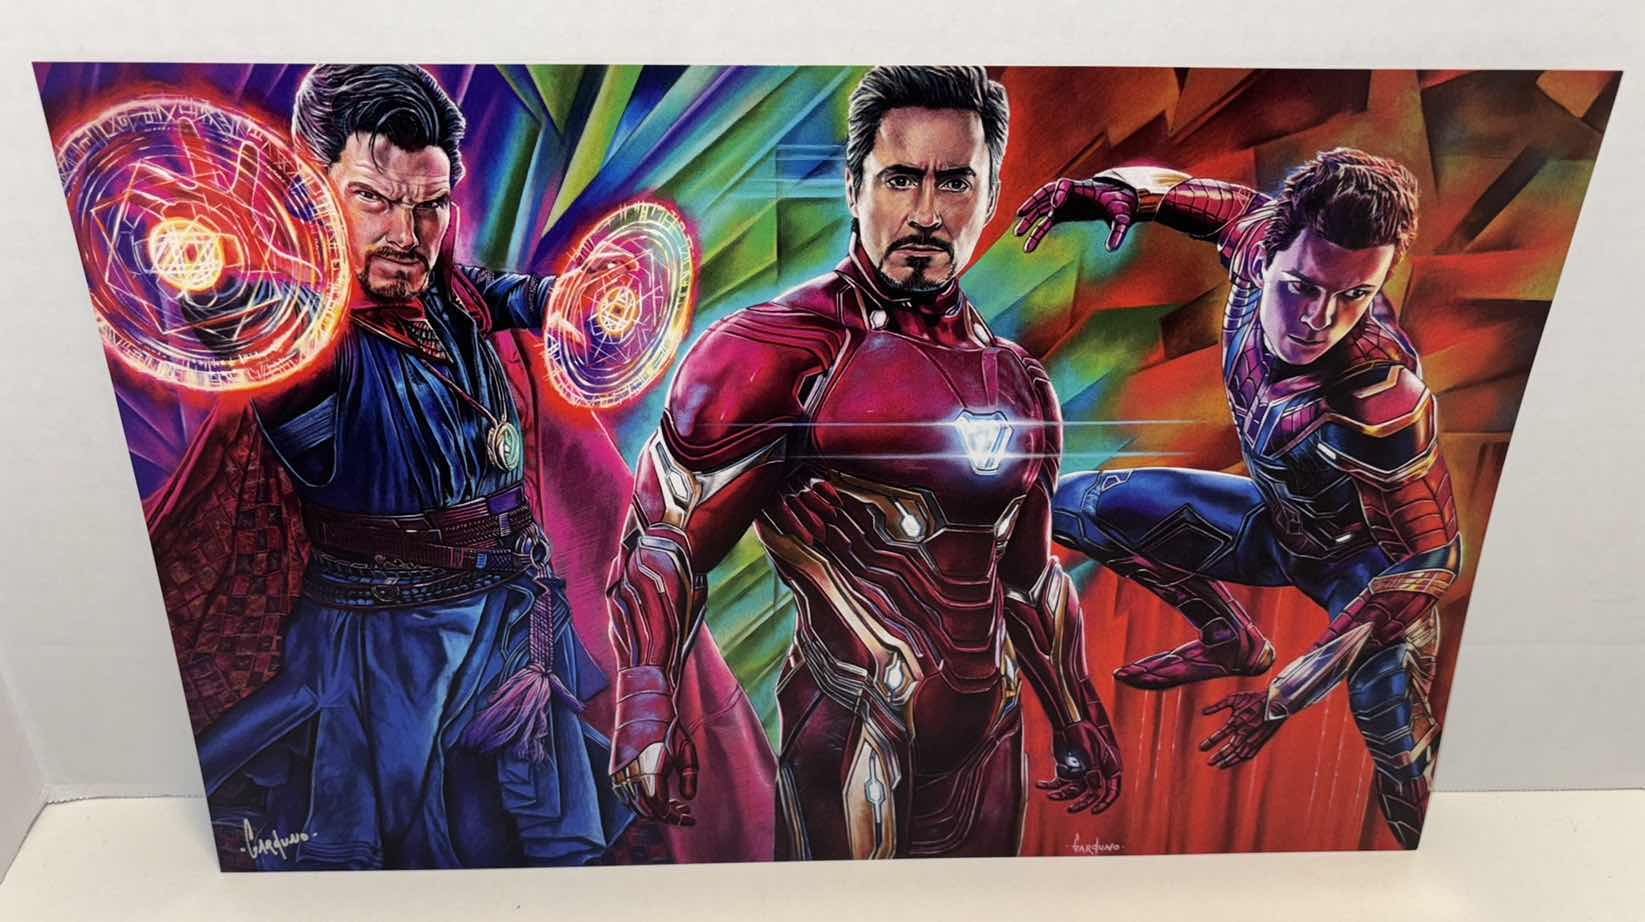 Photo 1 of VICTOR GARDUNO AVENGERS ENDGAME 11” X 17” INFINITY GLOSS UNFRAMED PRINT W EMBOSSED SEAL, DIGITAL SIGNATURE & OFFICIAL SIGNATURE W COA INCLUDED, STORED IN A RIGID PRINT PROTECTOR SLEEVE